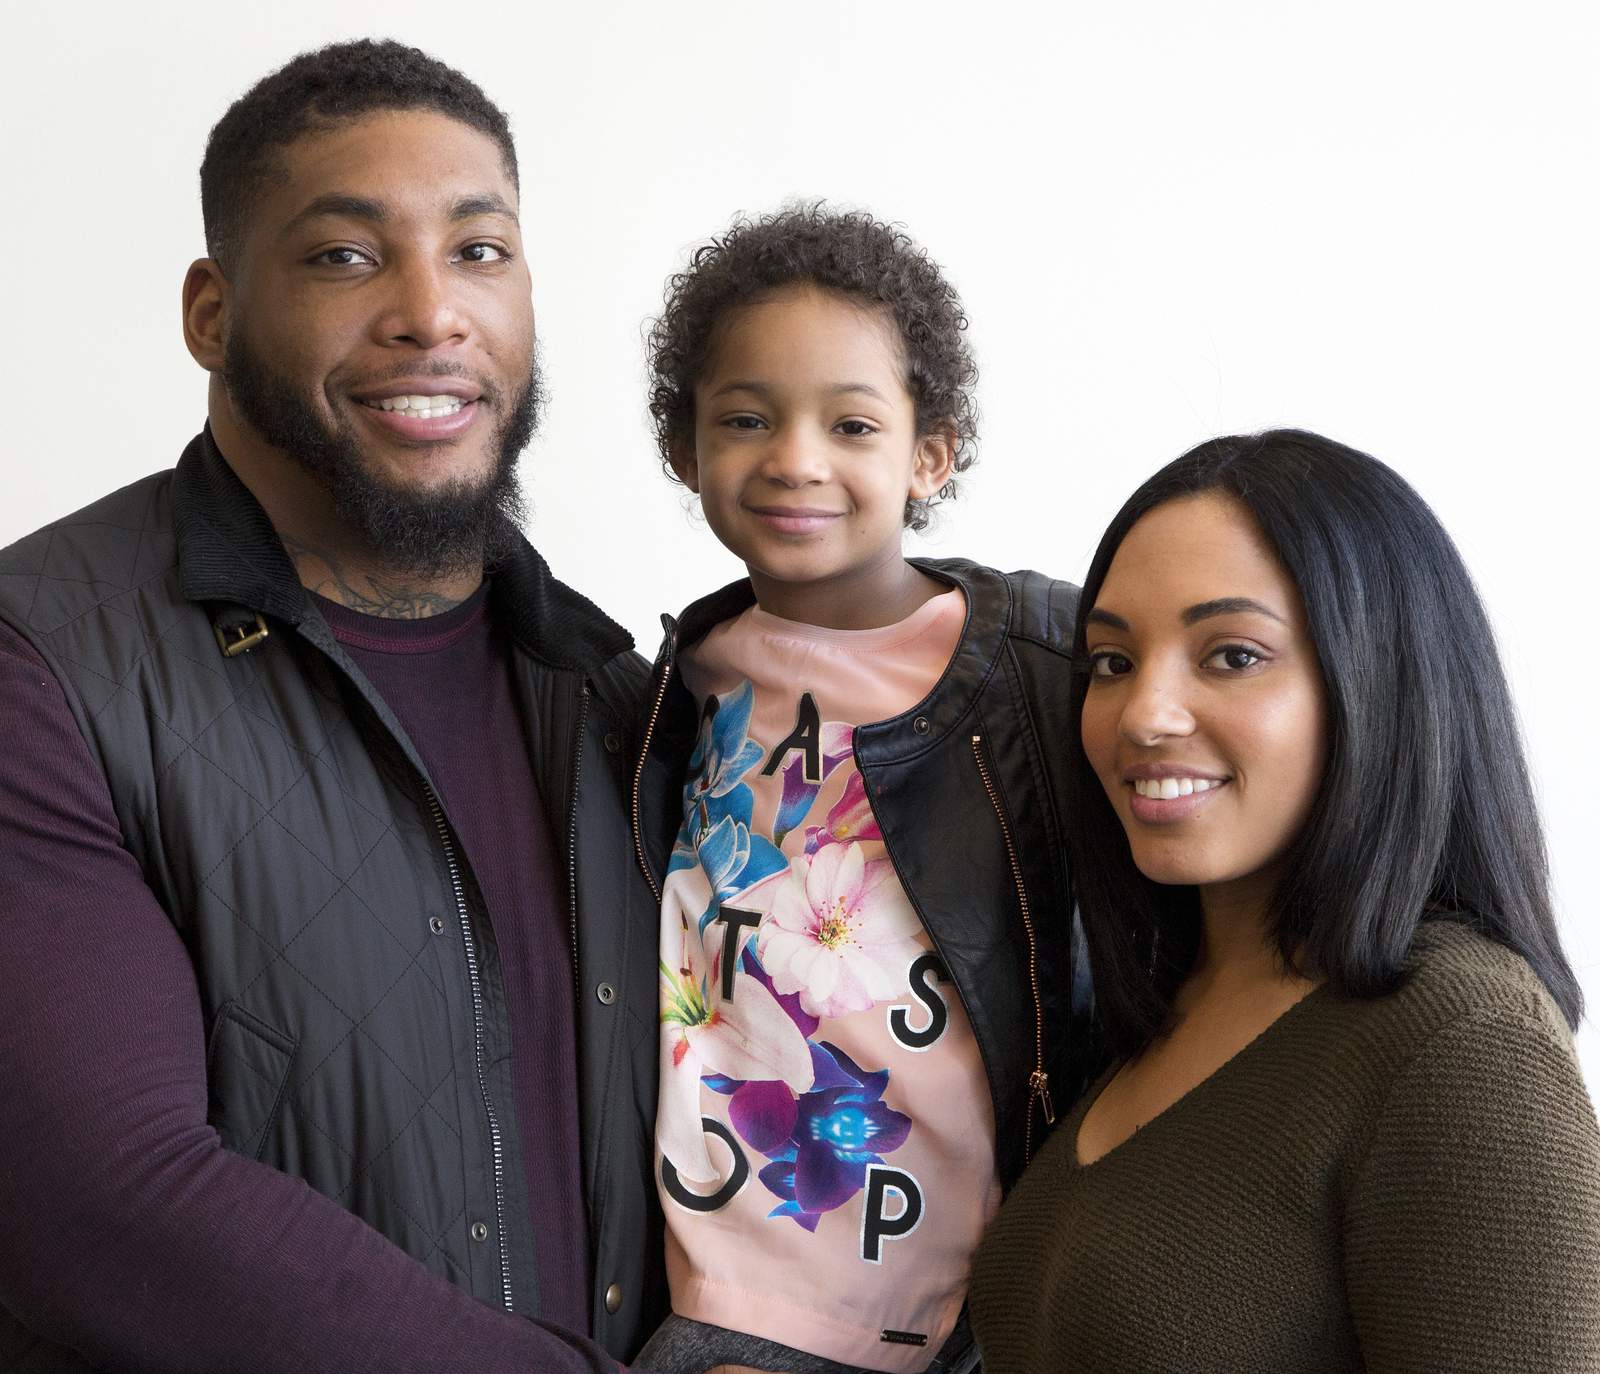 Fundraising goes on as Leah Still at 5 years cancer free